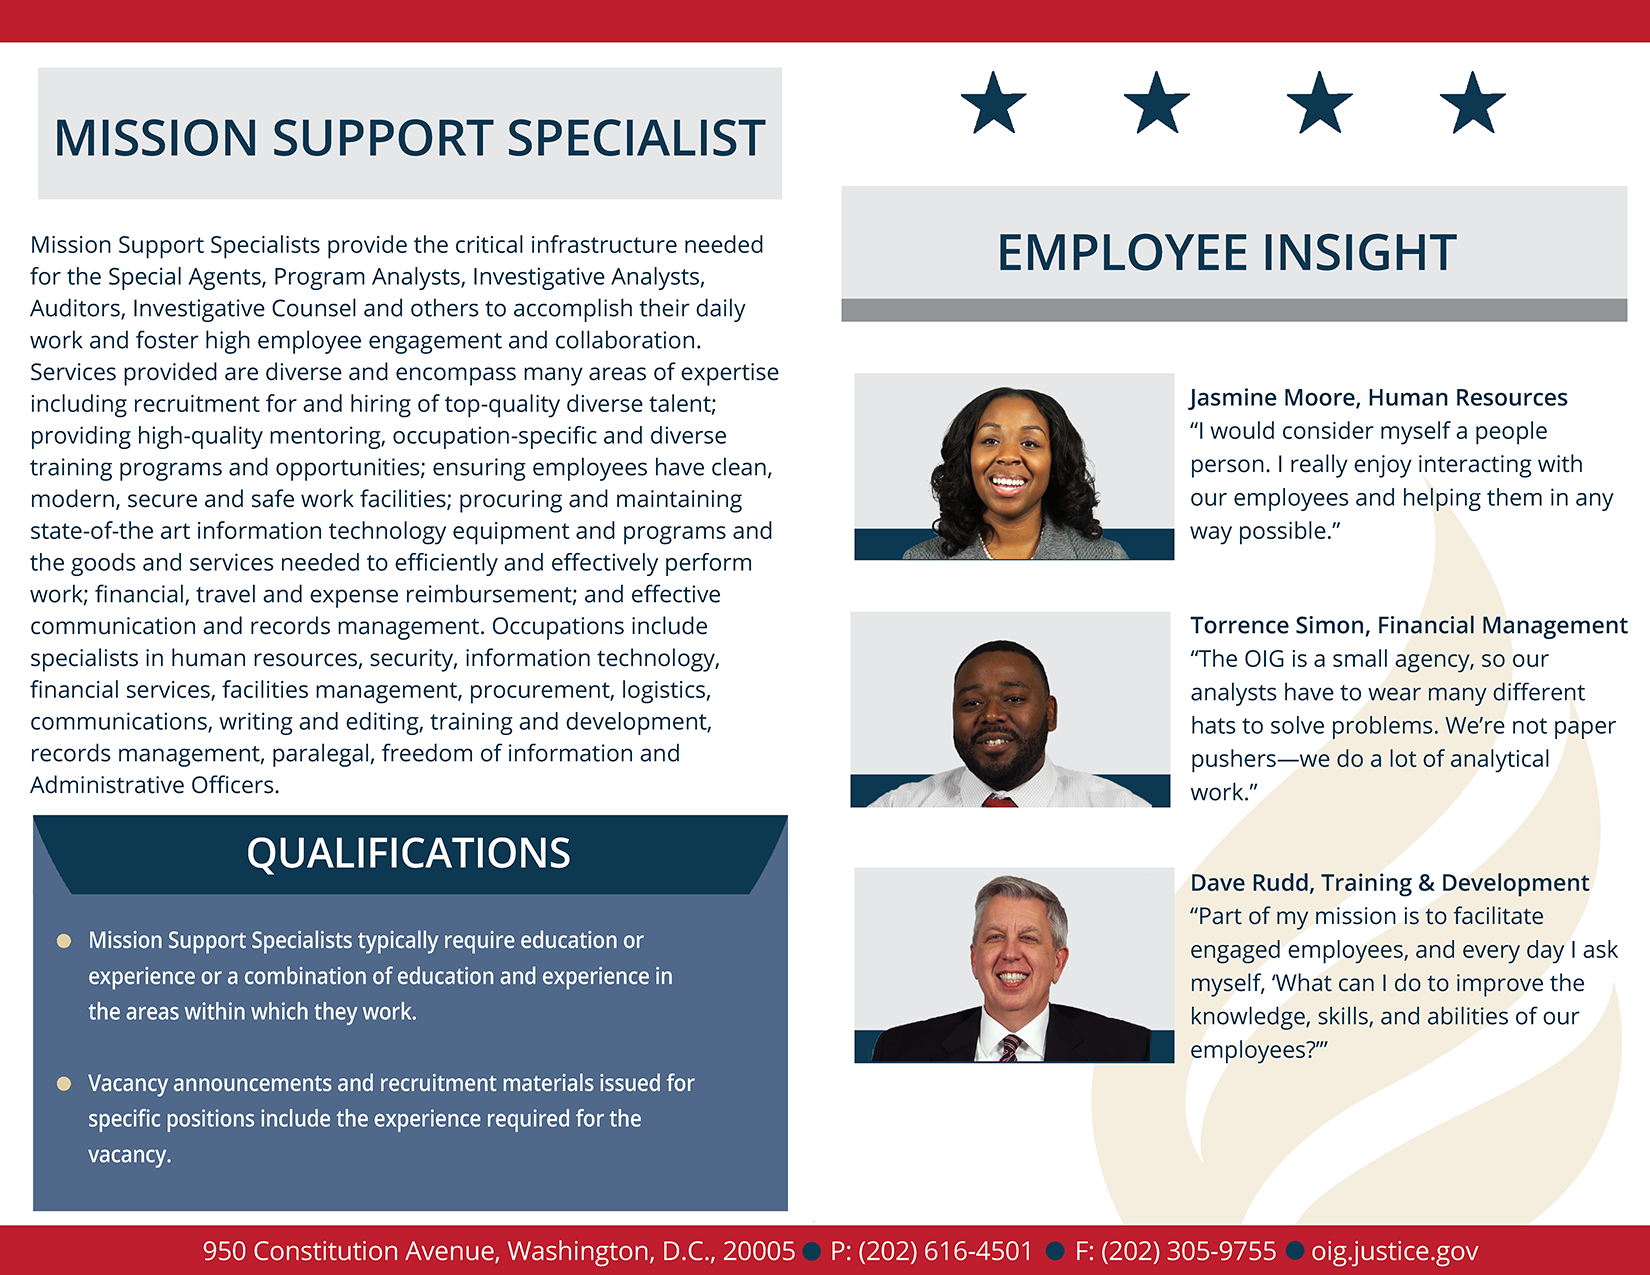 Read more about mission support employees experiences